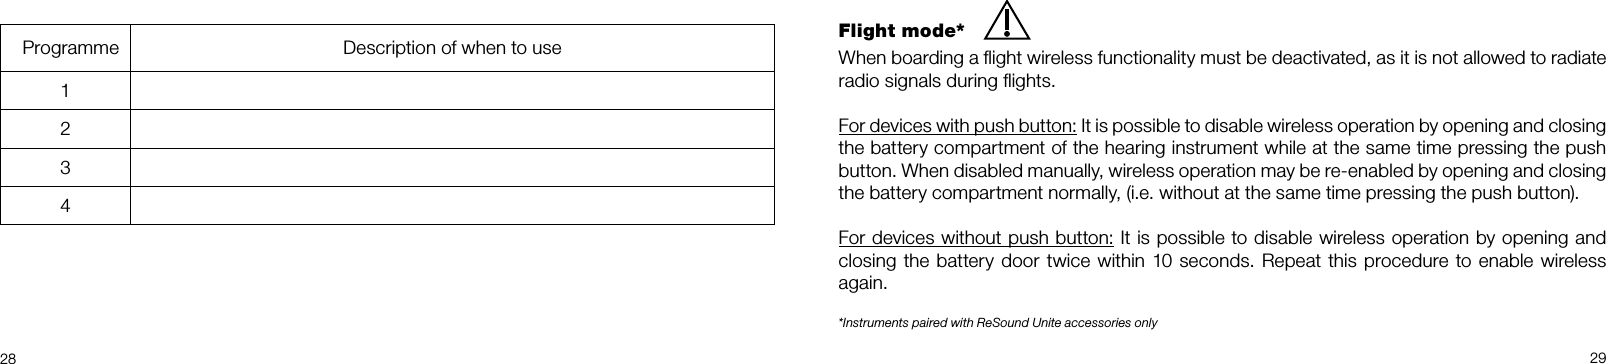  28 29Flight mode*When boarding a ﬂight wireless functionality must be deactivated, as it is not allowed to radiate radio signals during ﬂights.For devices with push button: It is possible to disable wireless operation by opening and closing the battery compartment of the hearing instrument while at the same time pressing the push button. When disabled manually, wireless operation may be re-enabled by opening and closing the battery compartment normally, (i.e. without at the same time pressing the push button). For devices without push button: It is possible to disable wireless operation by opening and closing the battery door twice within 10 seconds. Repeat this procedure to enable wireless again.*Instruments paired with ReSound Unite accessories only  Programme Description of when to use1234